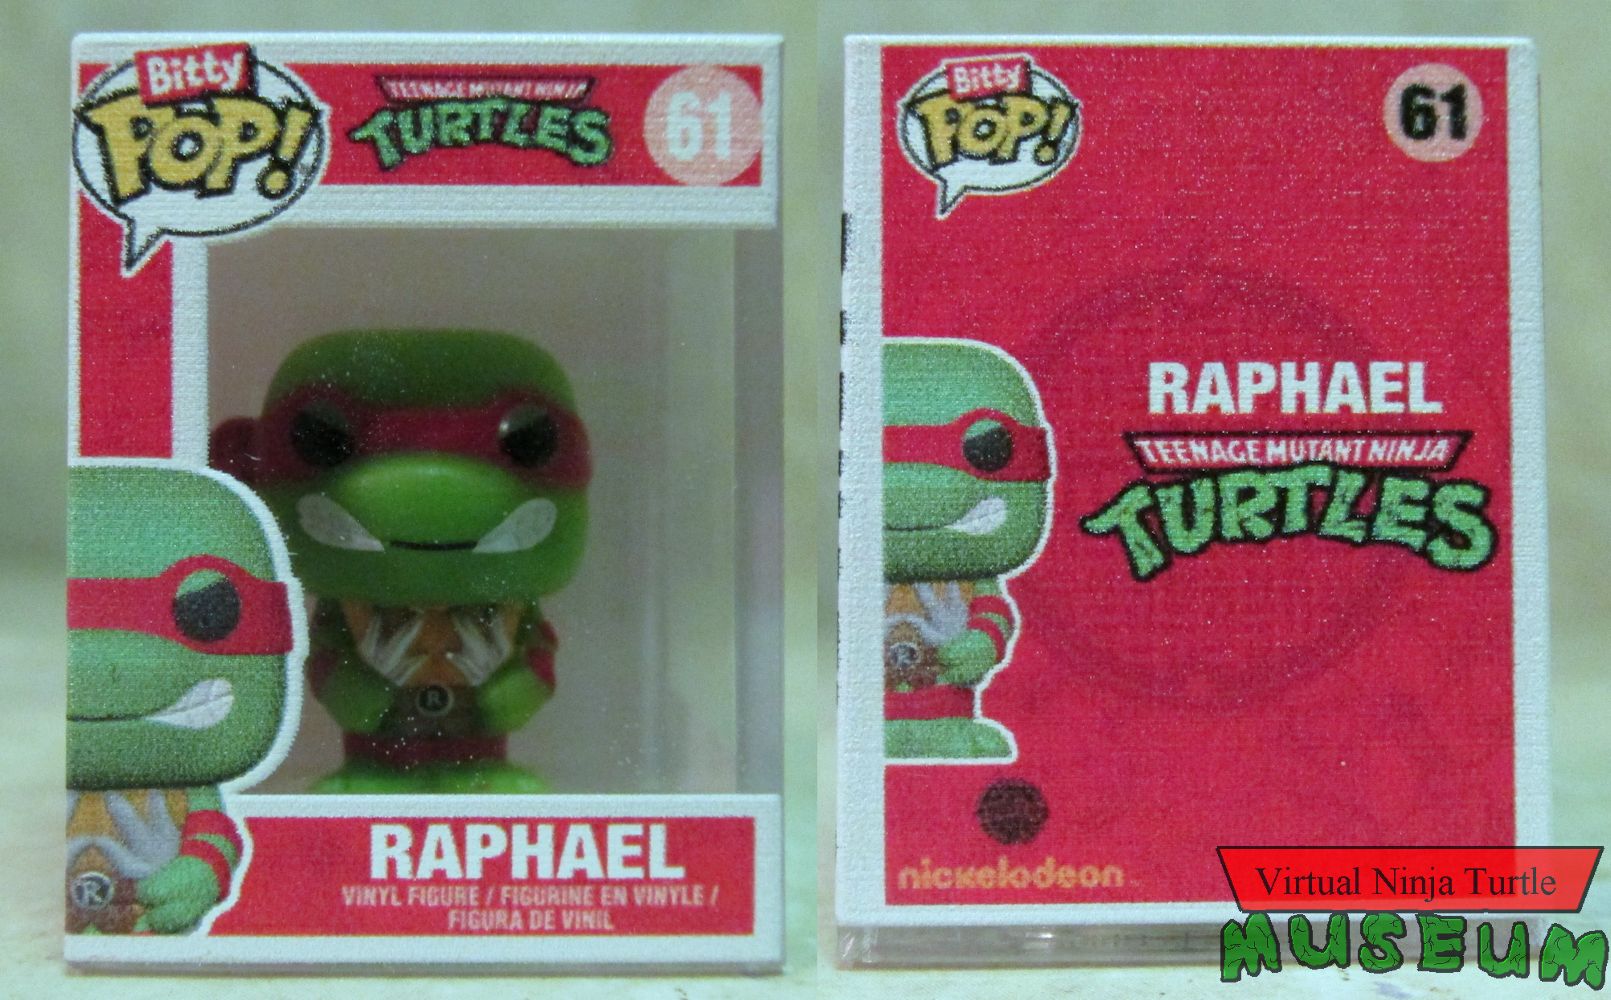 Raphael in case front and back